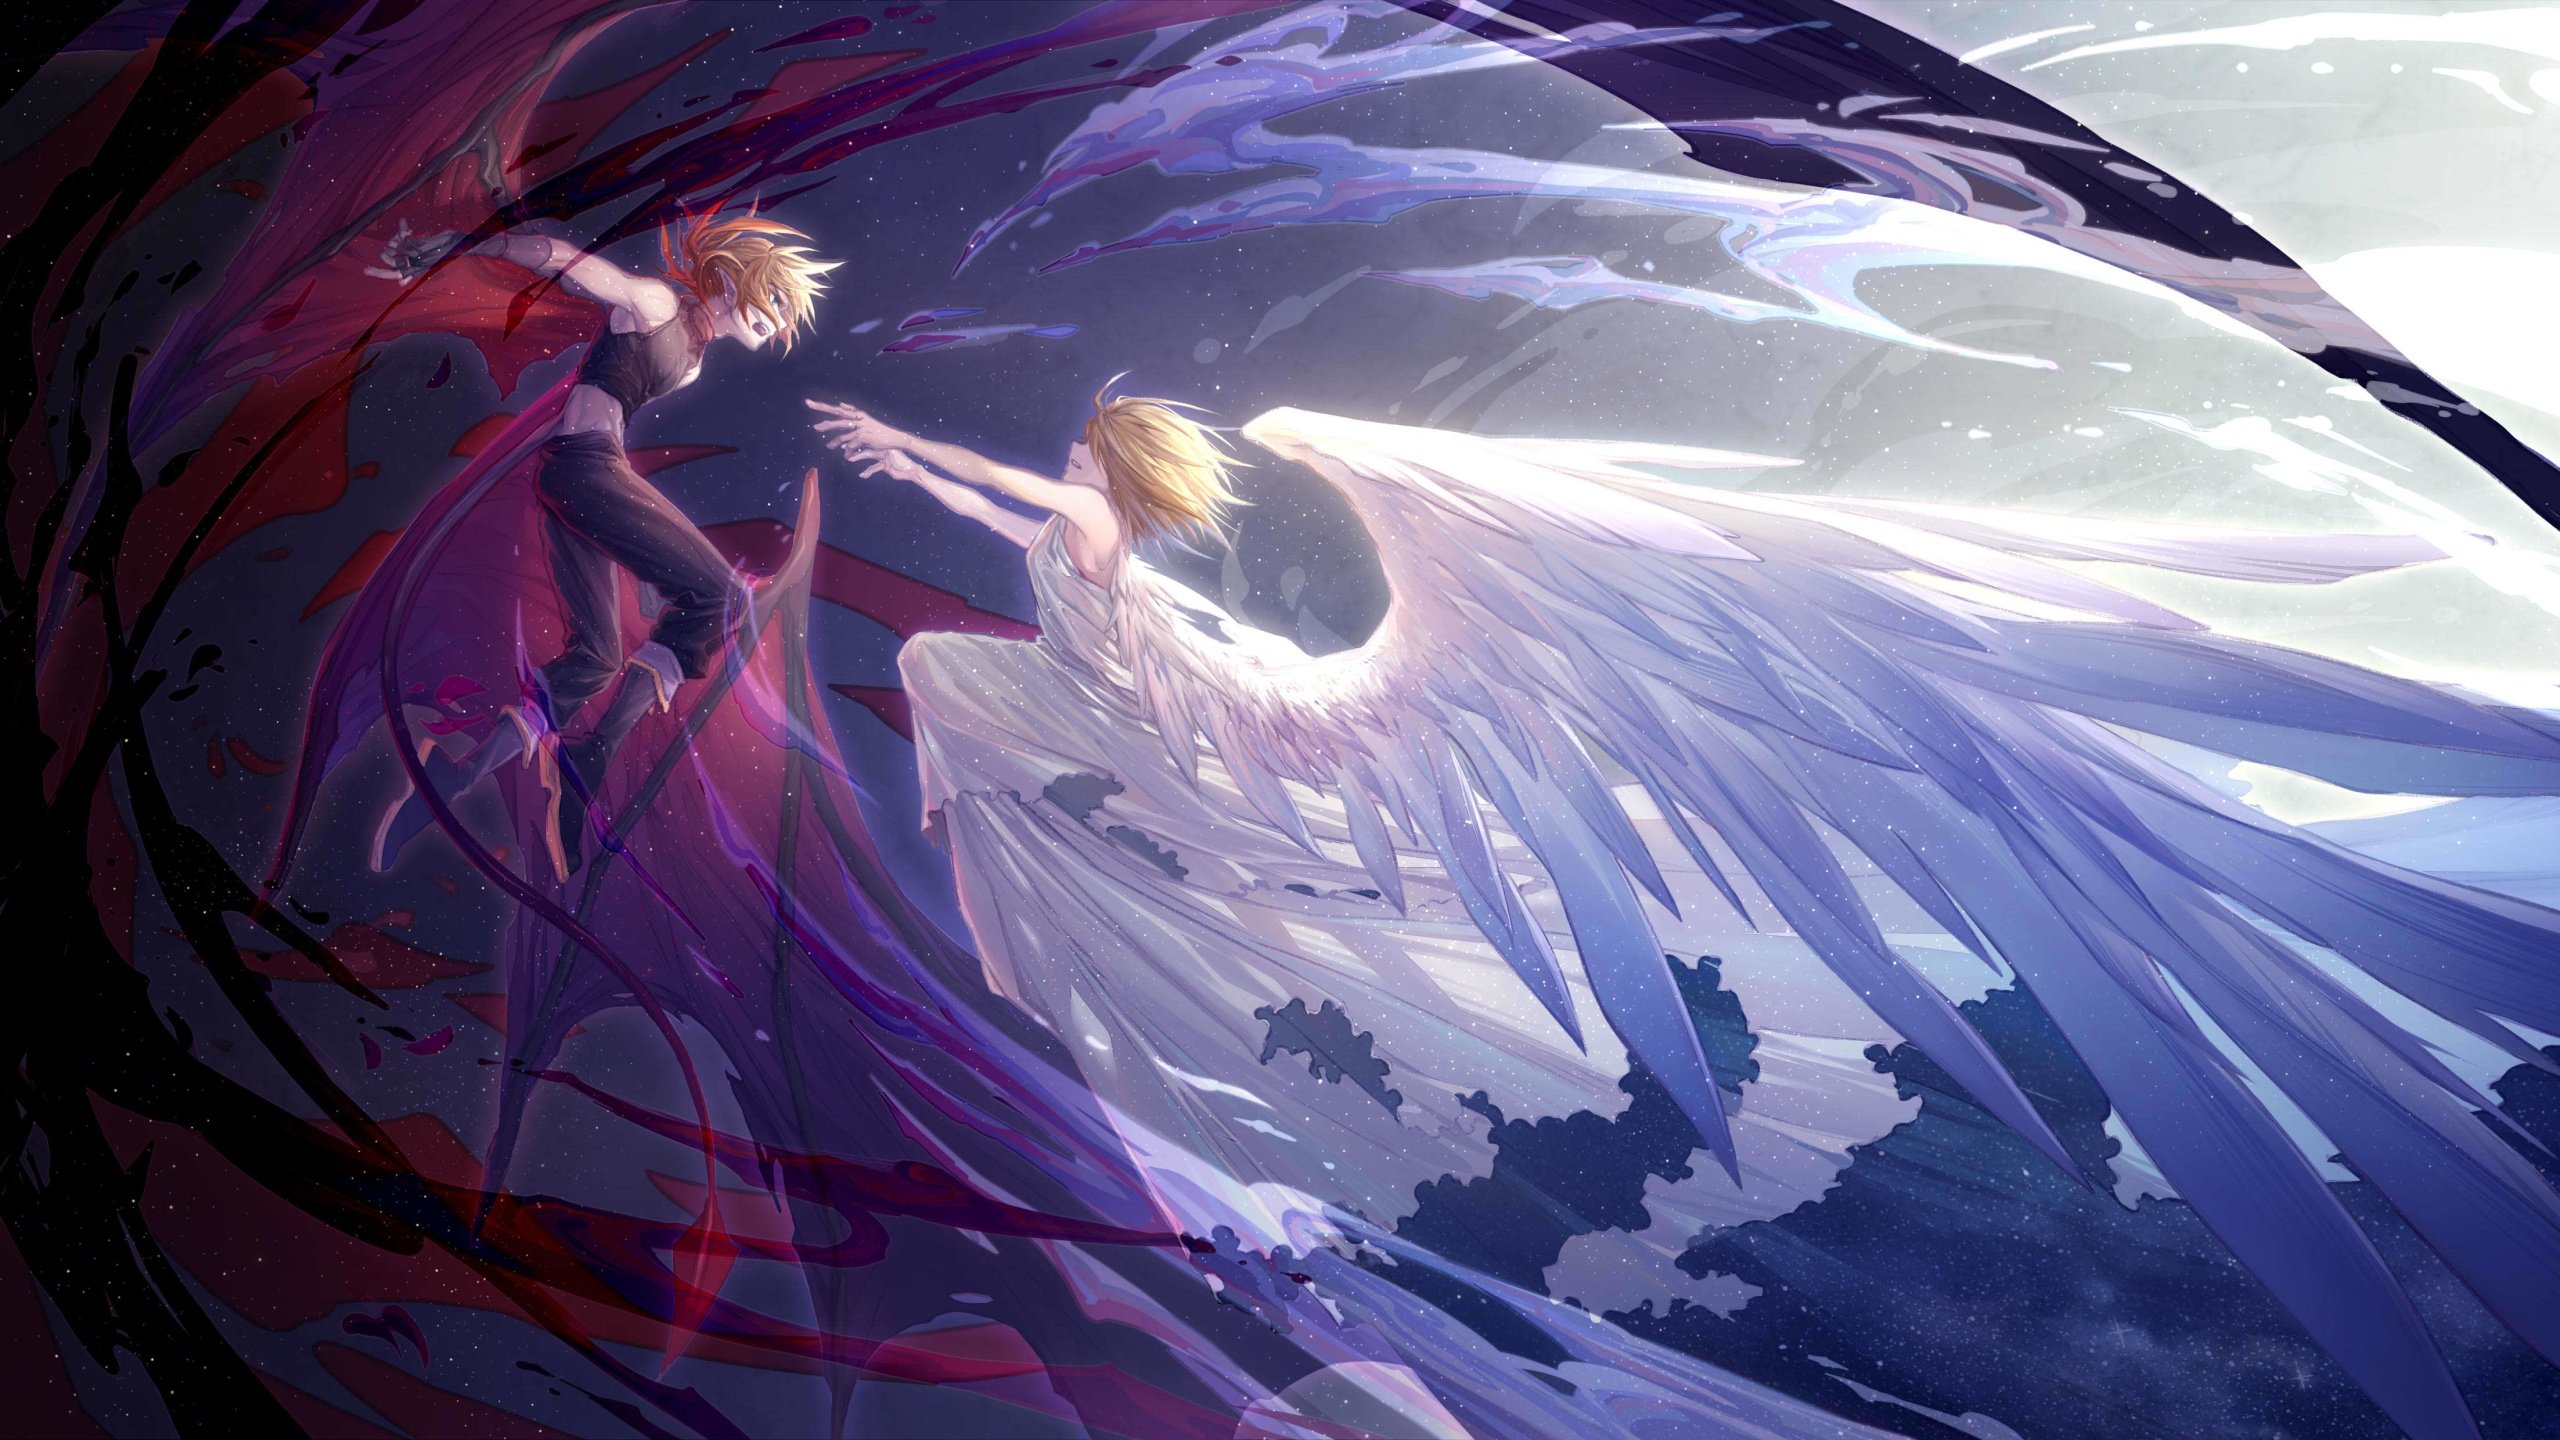 Anime Flying Girls Wallpapers - Wallpaper Cave